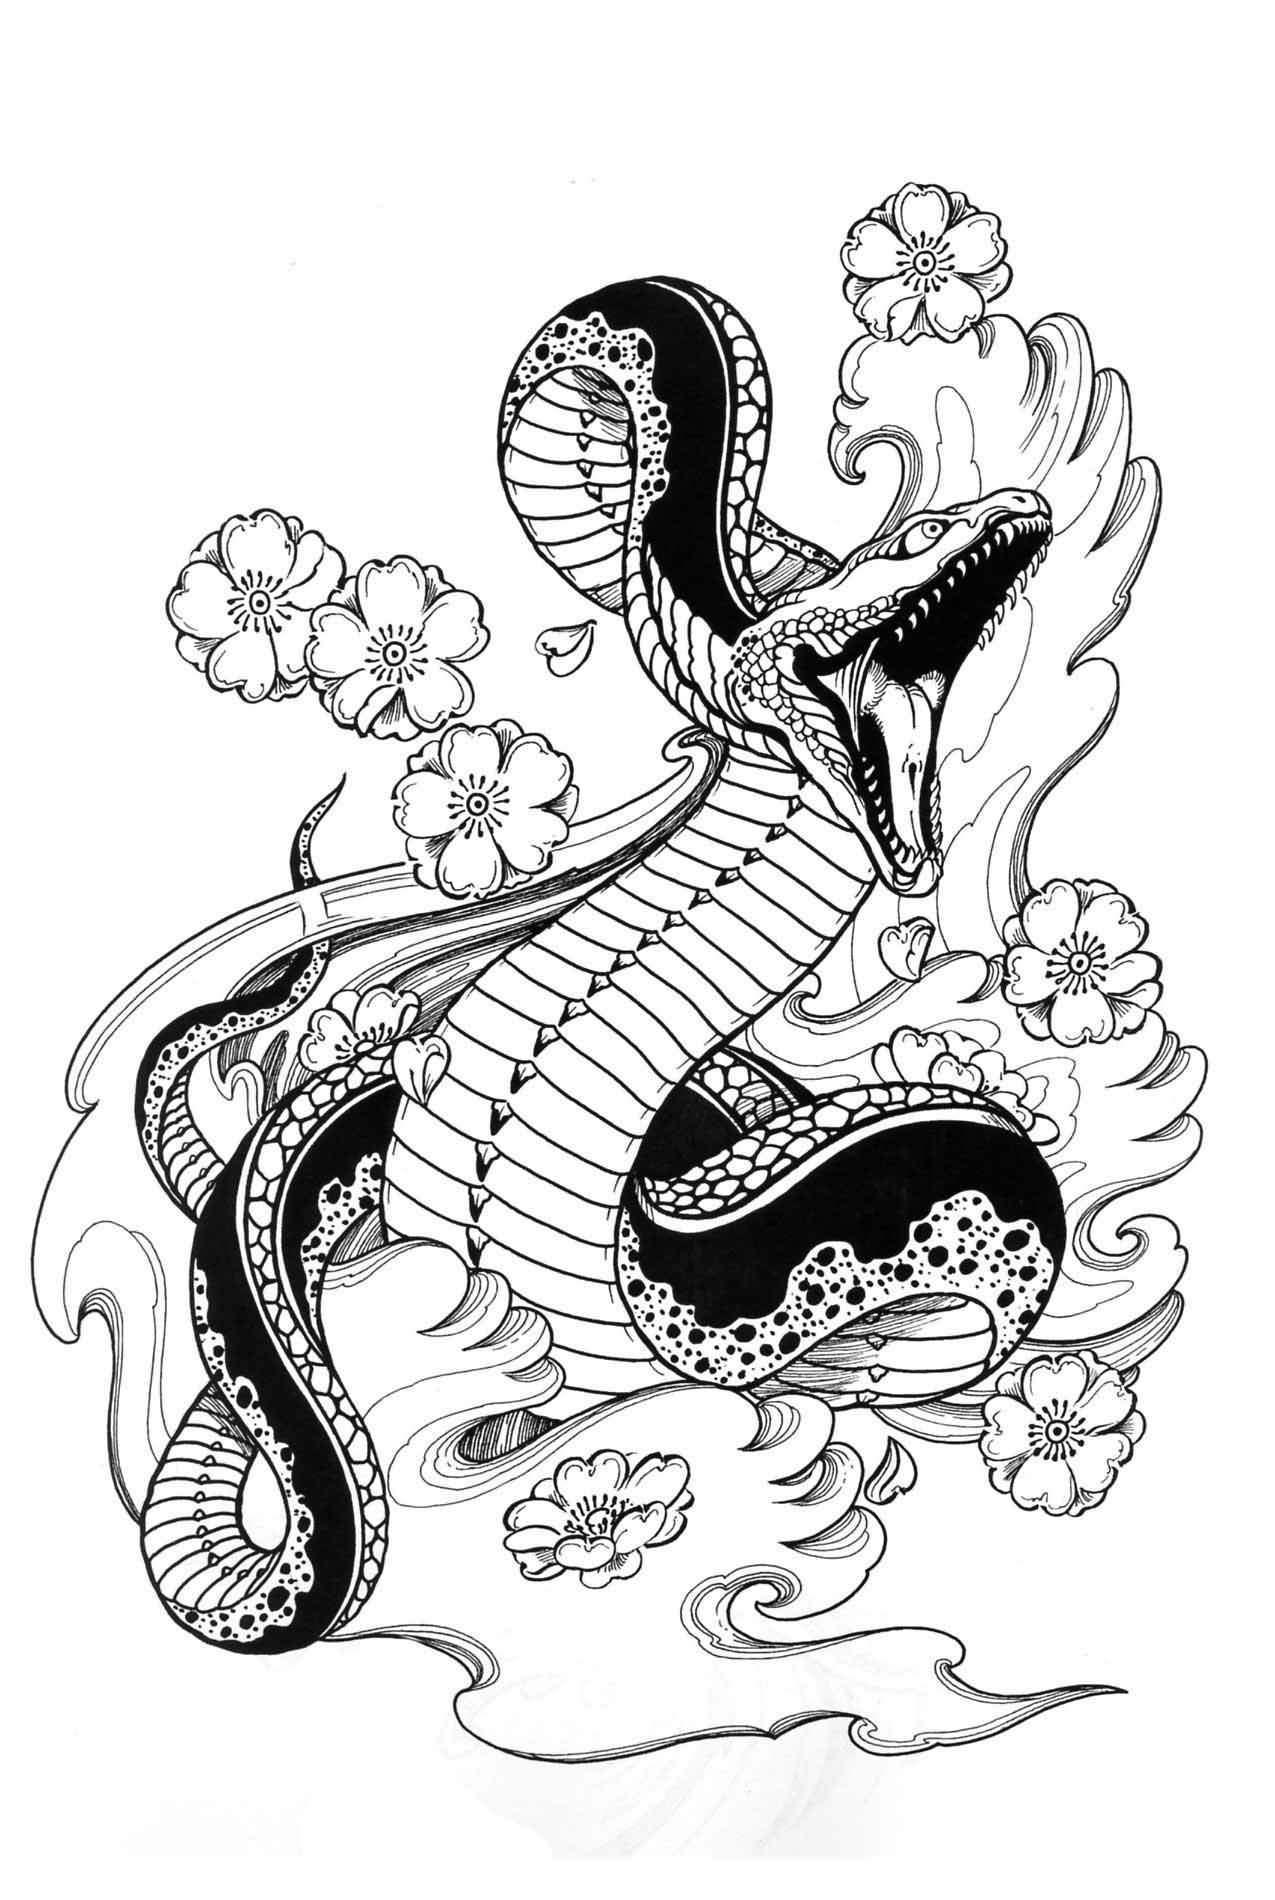 Black Ink Japanese Snake With Flowers Tattoo Stencil